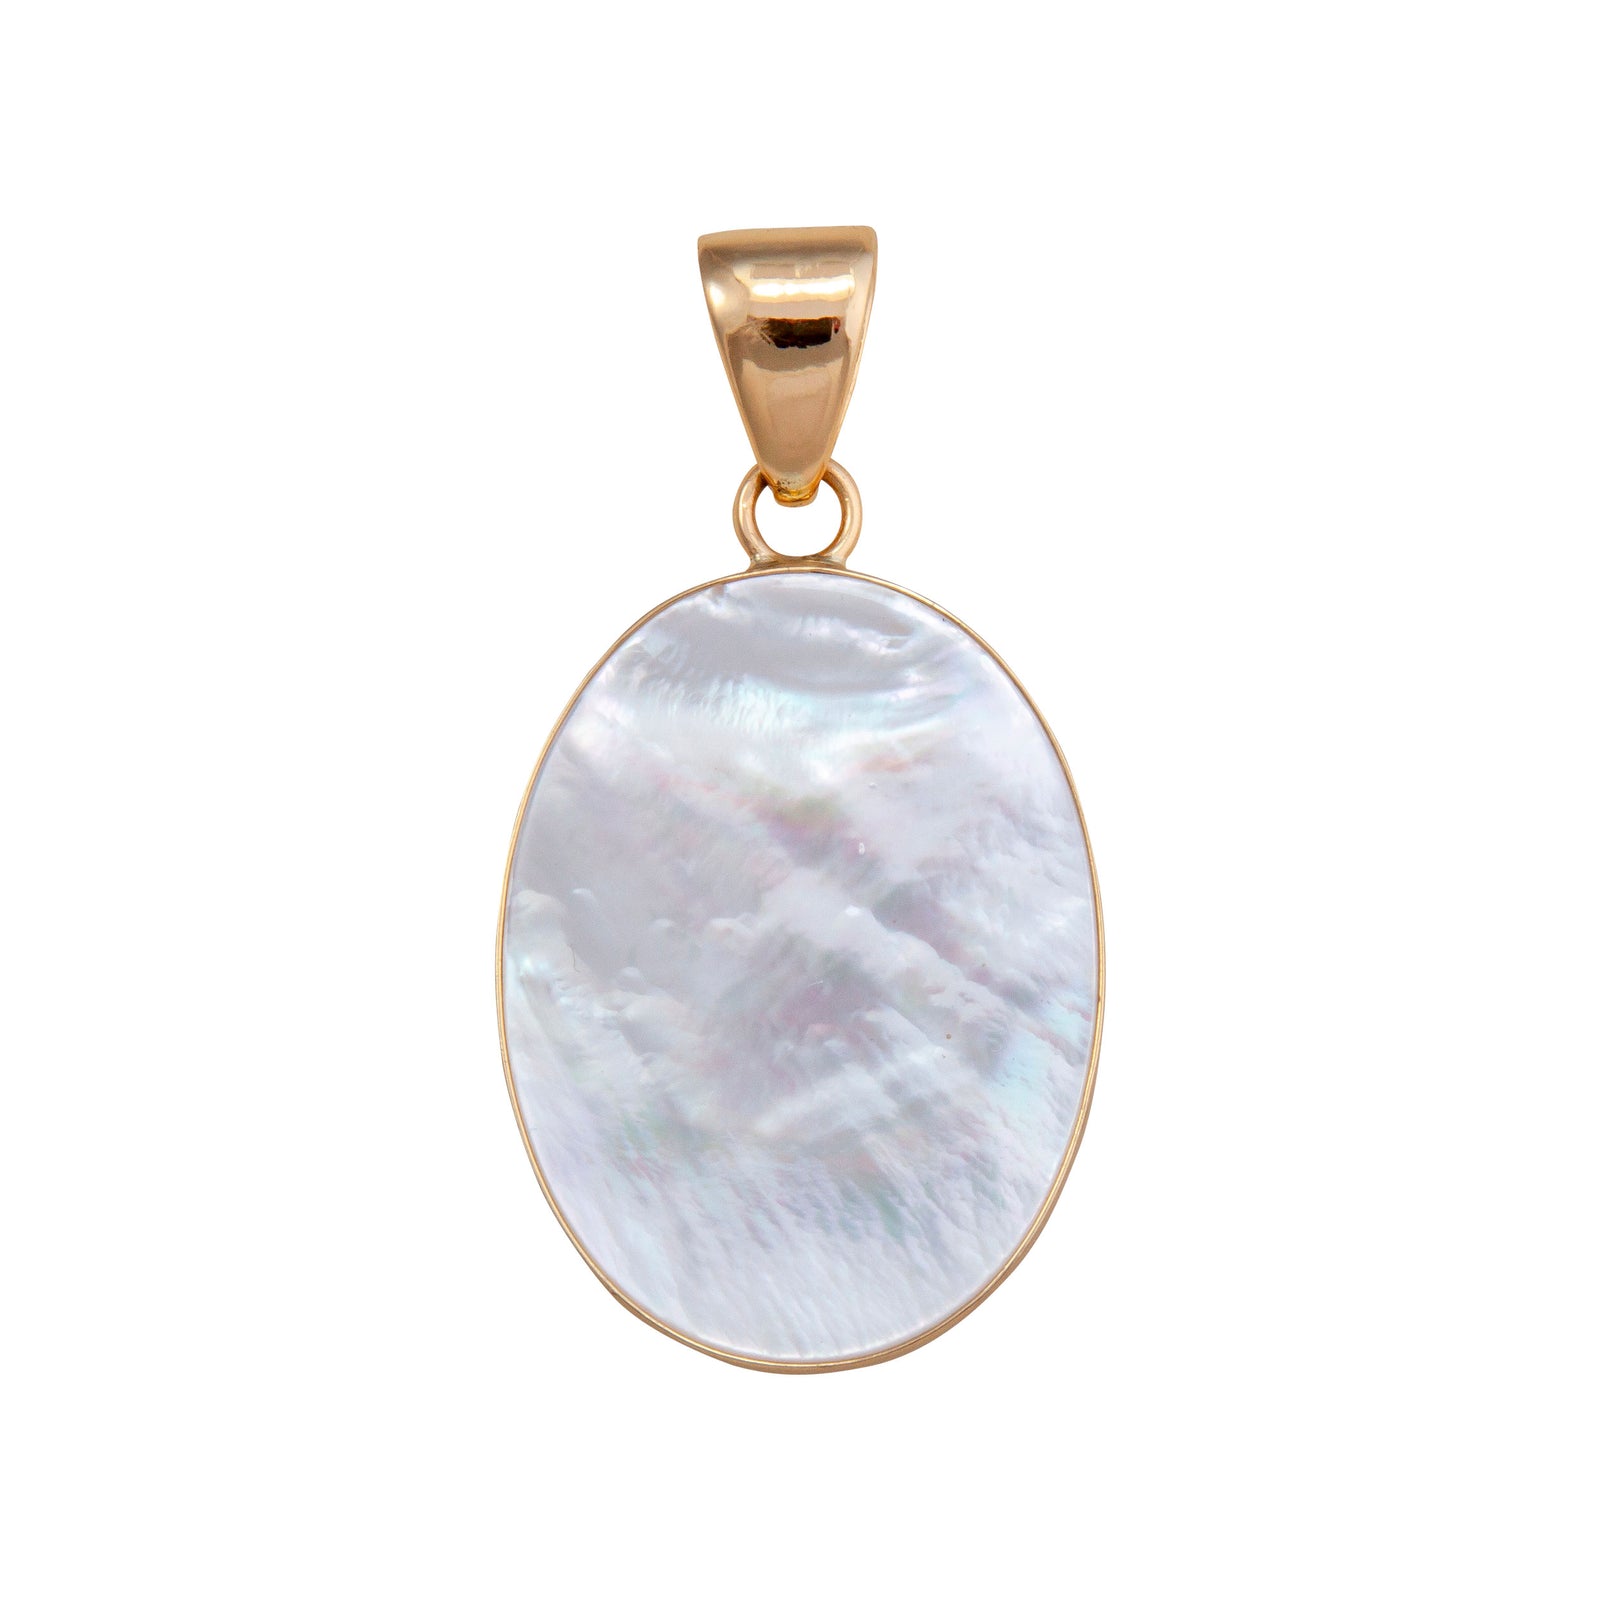 Alchemia Mother of Pearl Oval Pendant | Charles Albert Jewelry